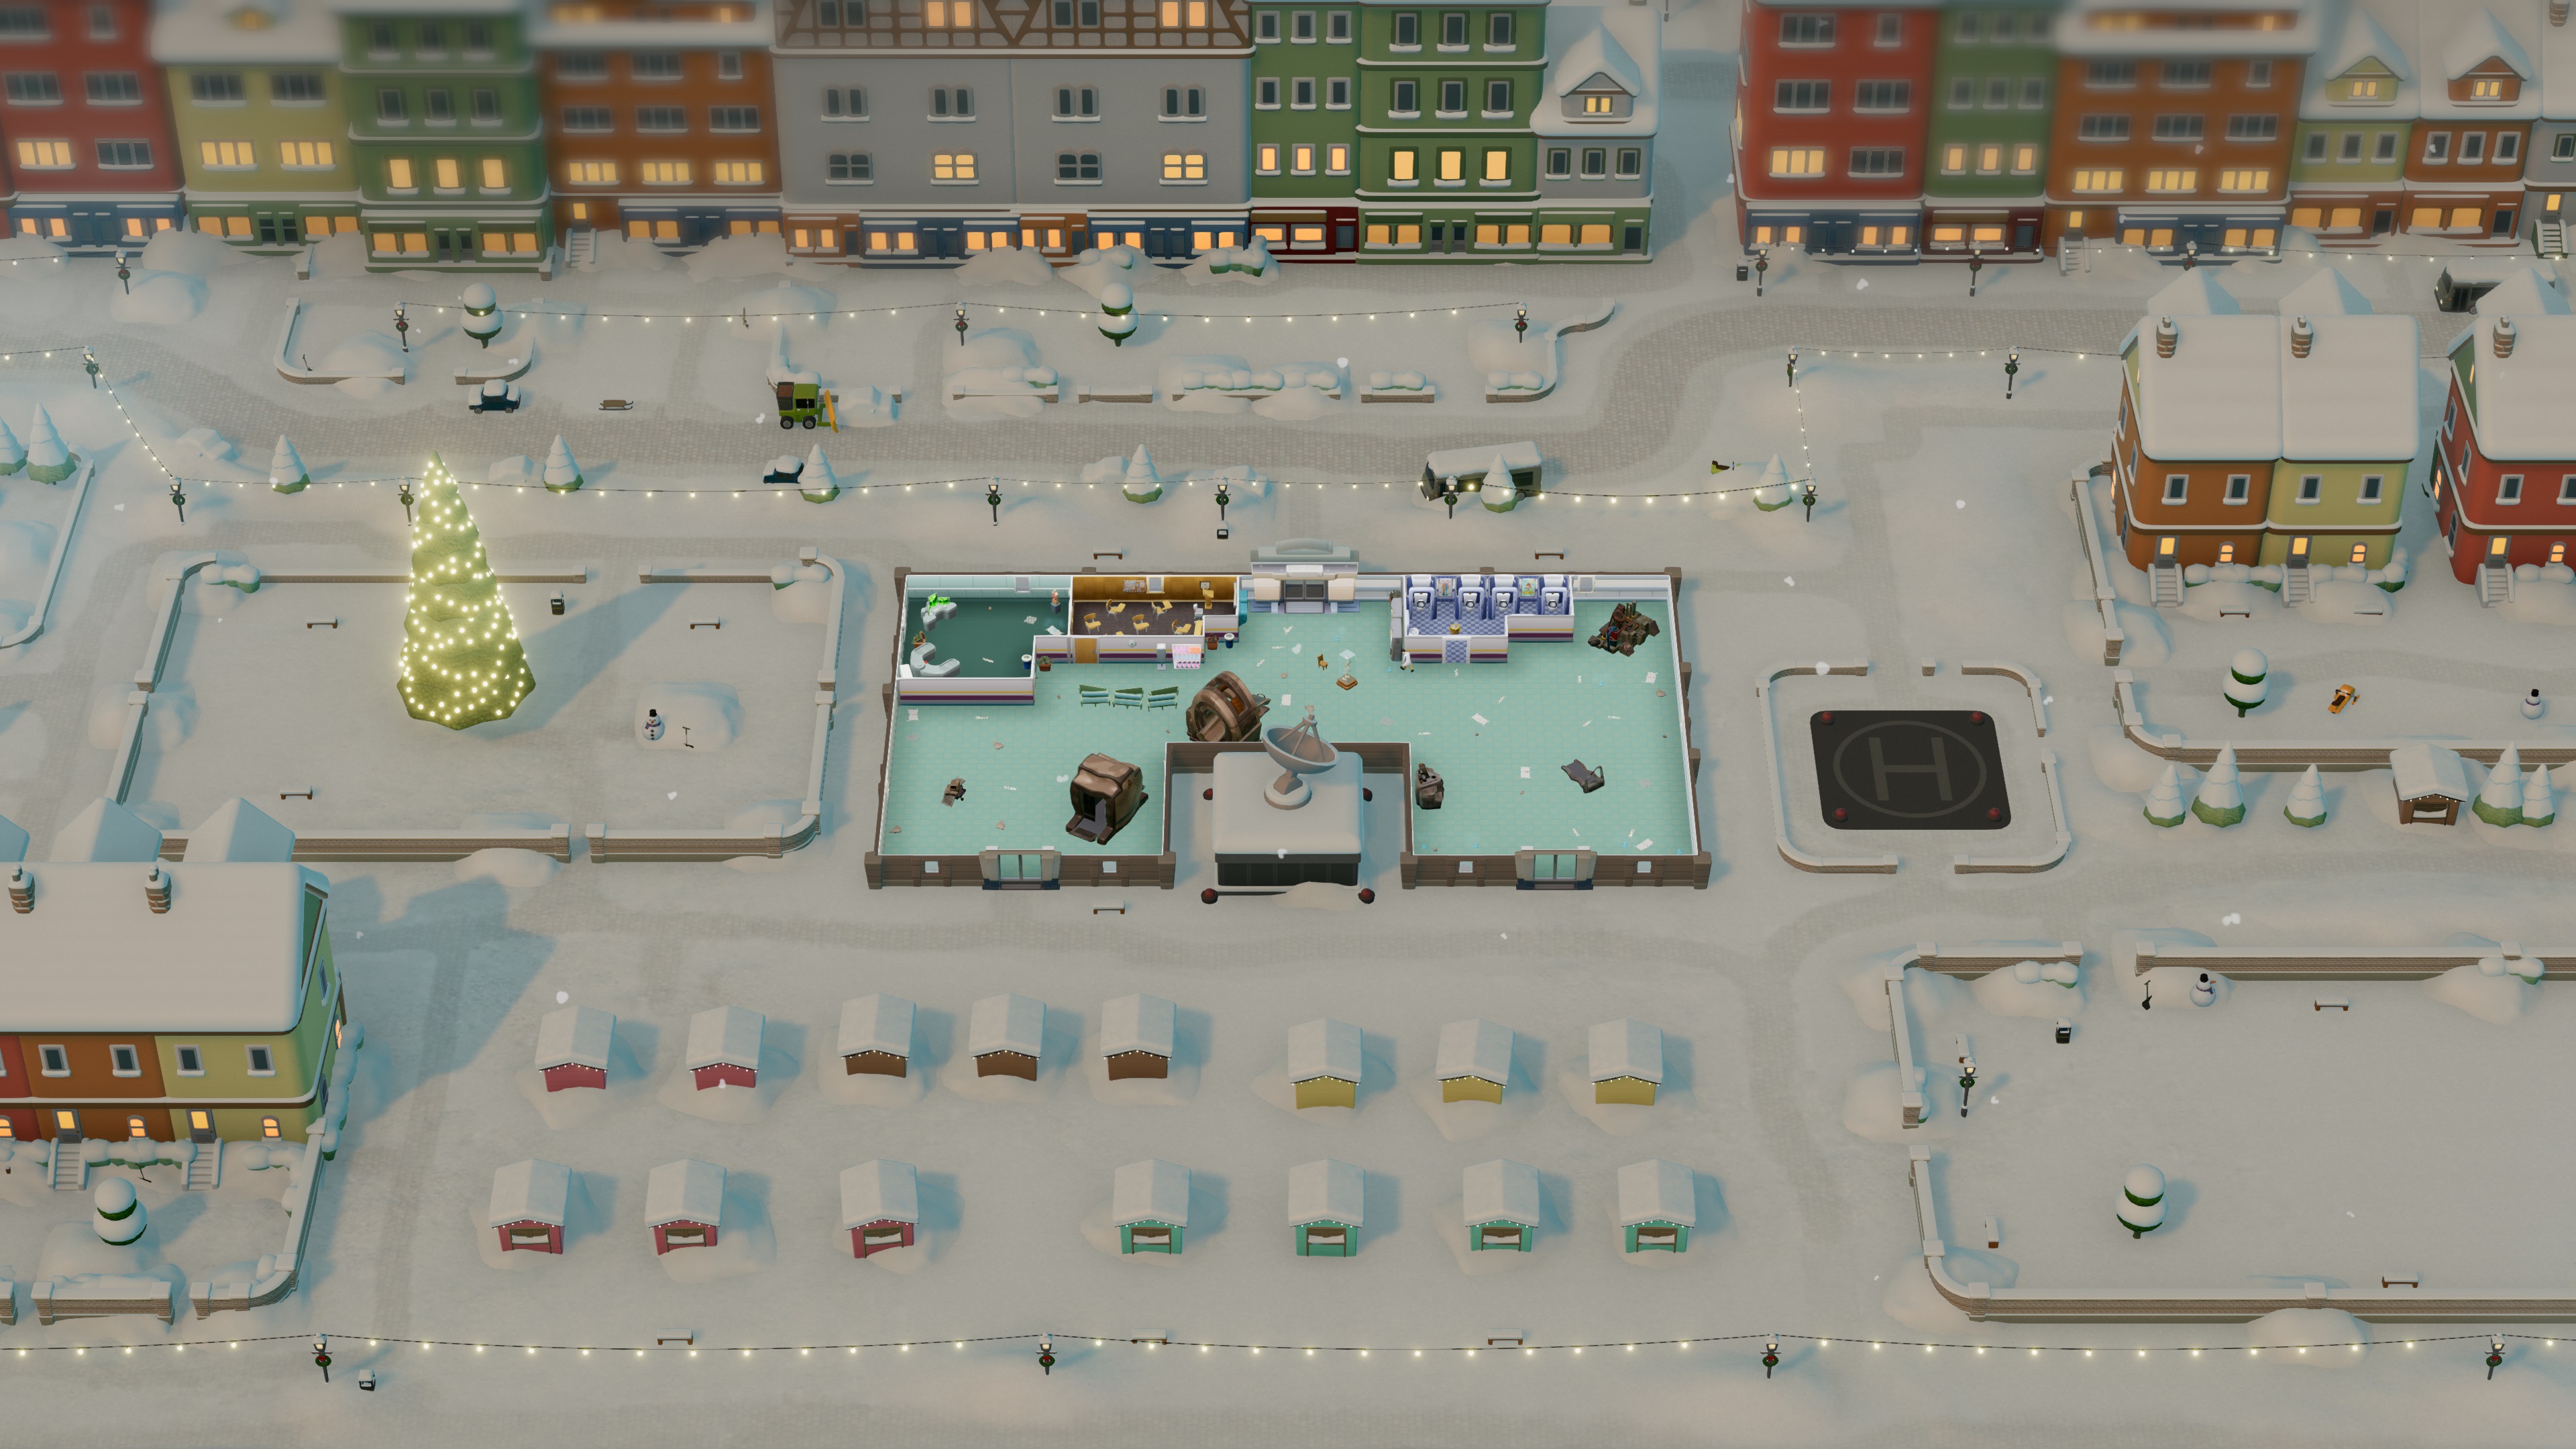 two point hospital 1.04 patch